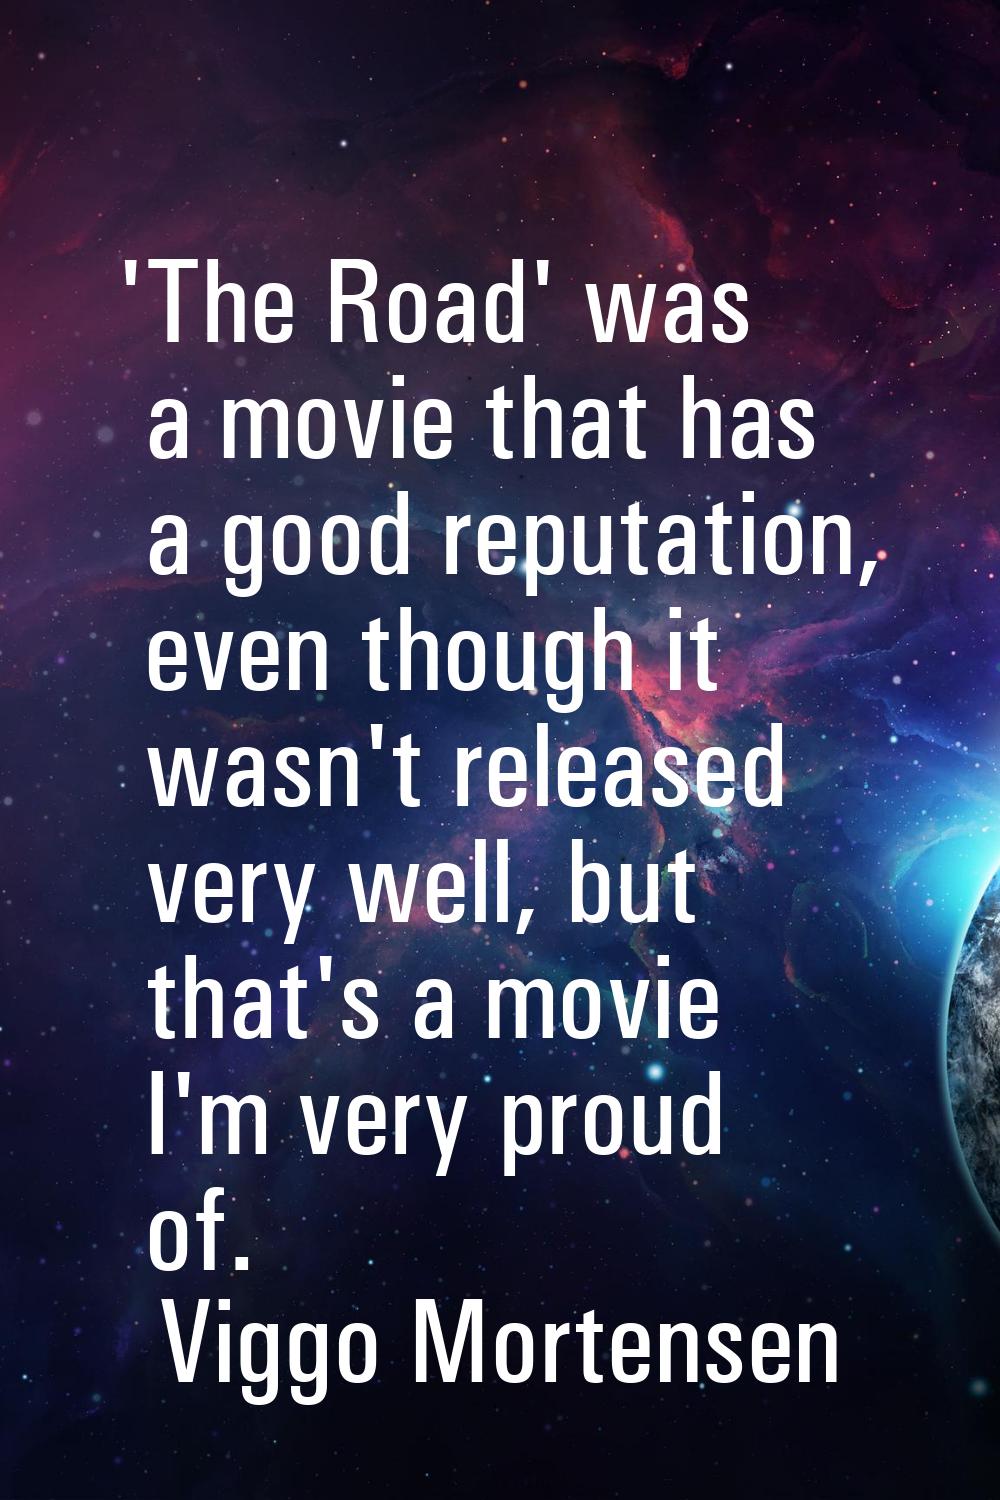 'The Road' was a movie that has a good reputation, even though it wasn't released very well, but th